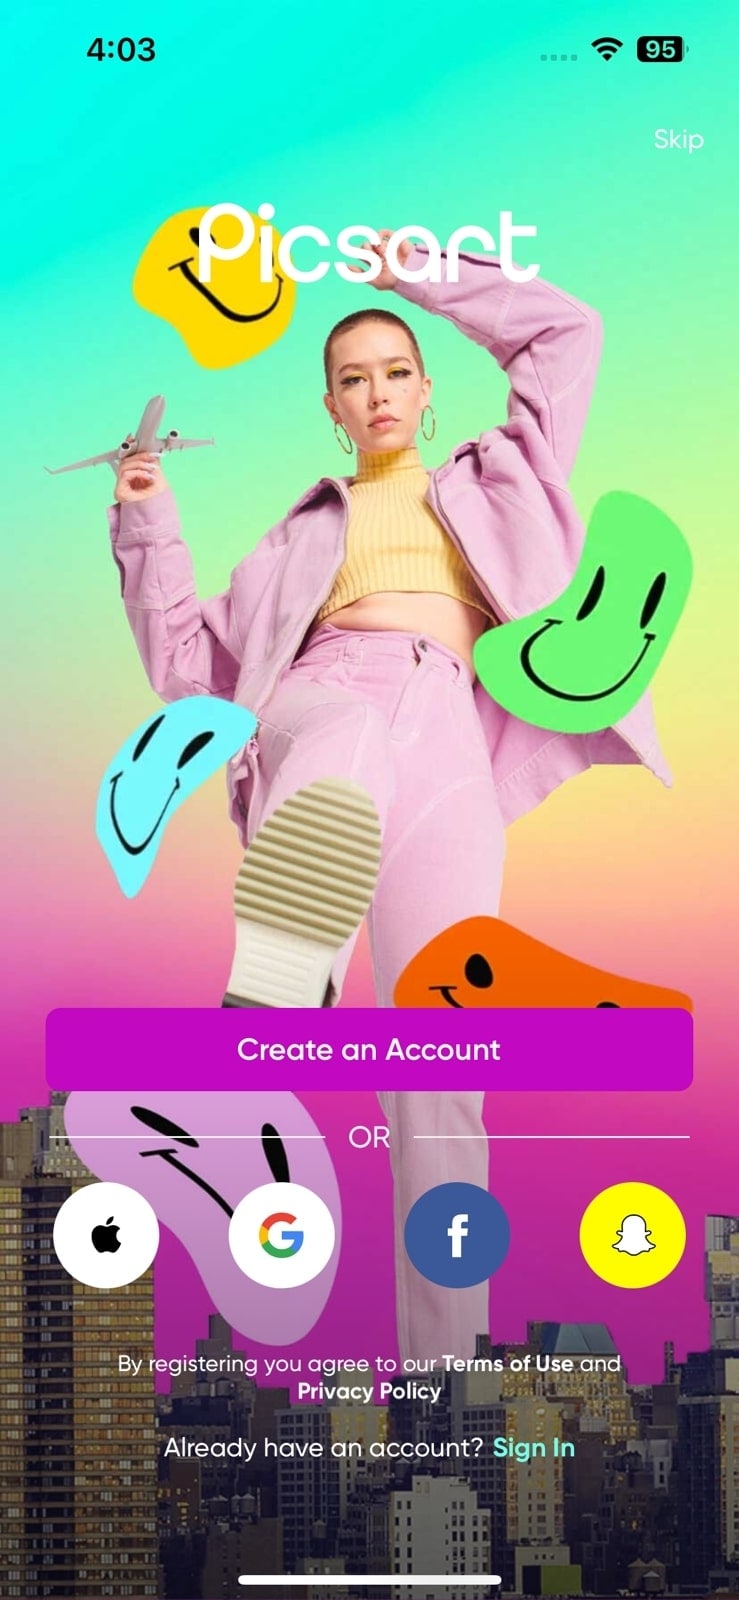 create a picsart account if needed